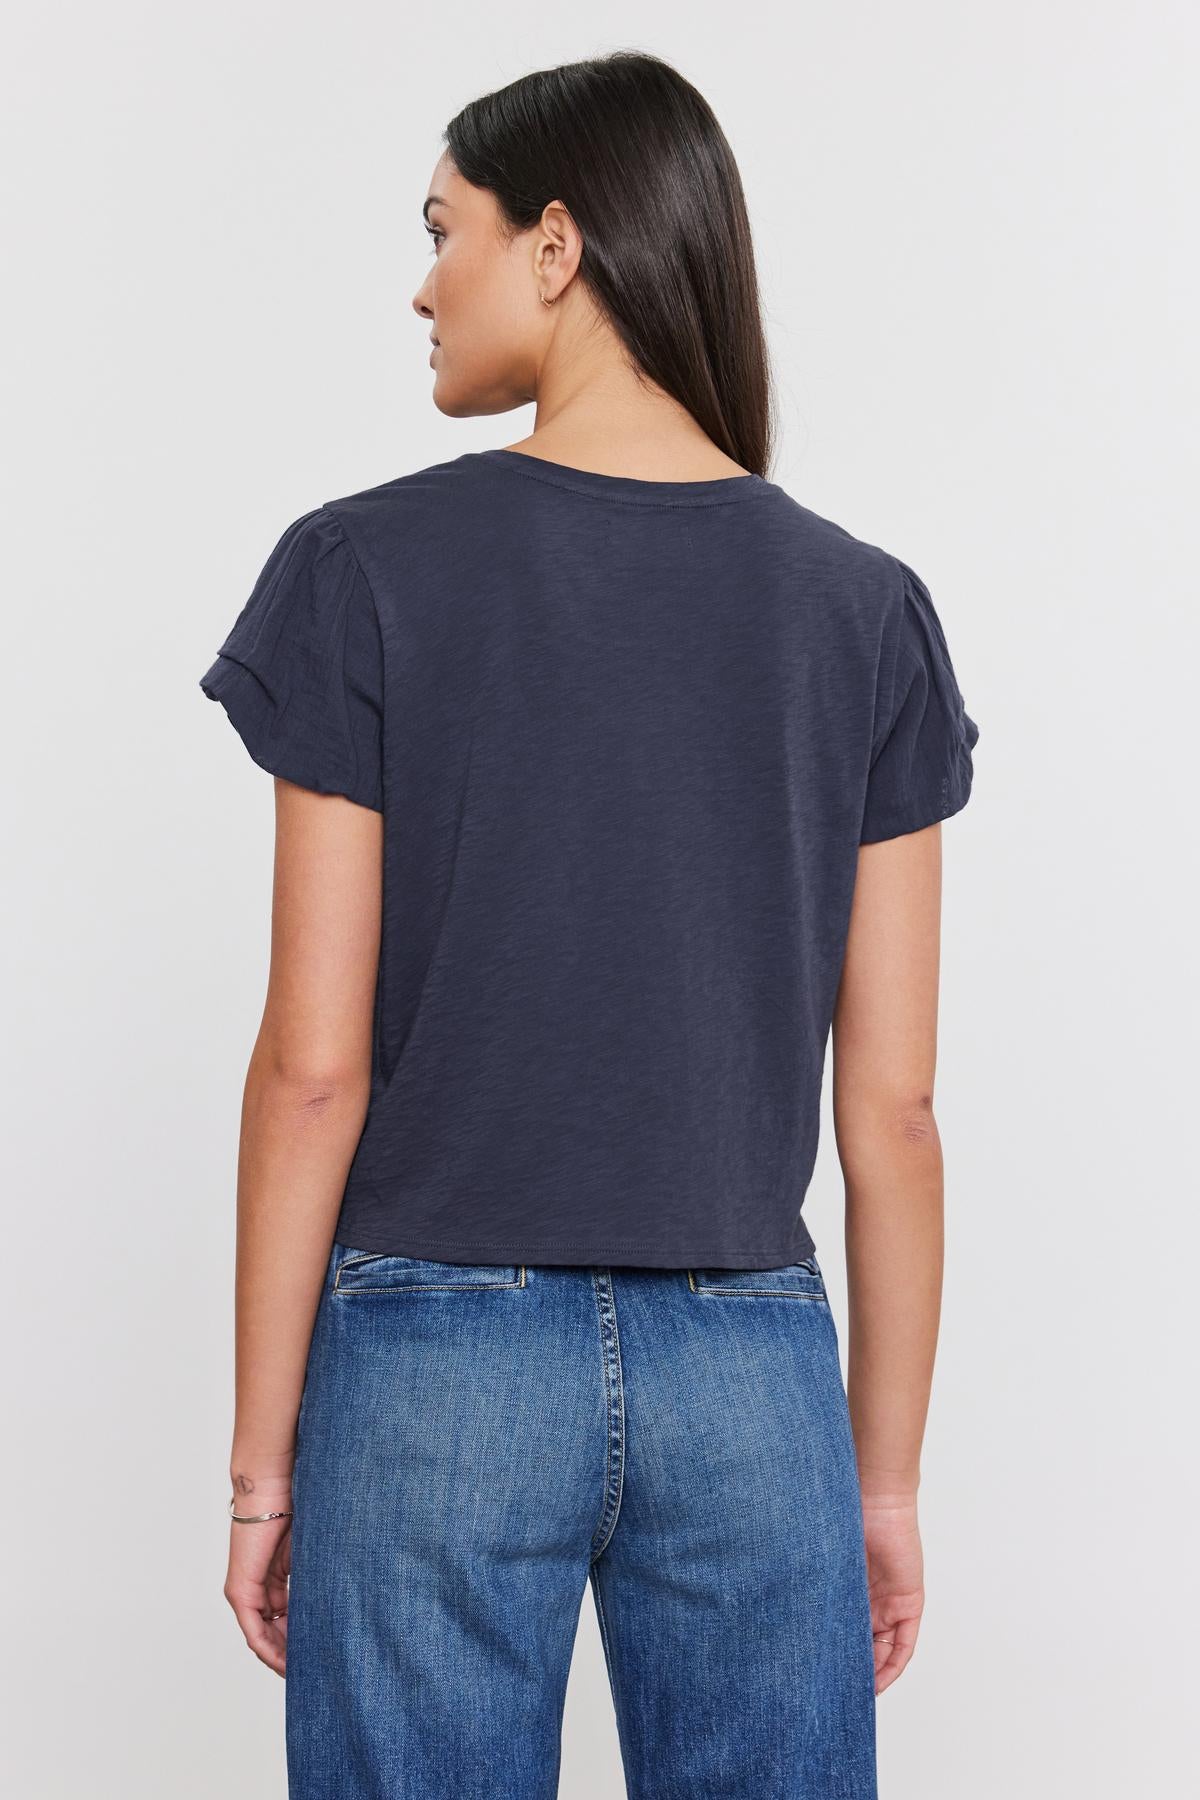   Woman viewed from behind, wearing a dark blue cotton slub DELLA TEE with pleated sleeve detail and blue jeans, standing against a white background. (Brand Name: Velvet by Graham & Spencer) 